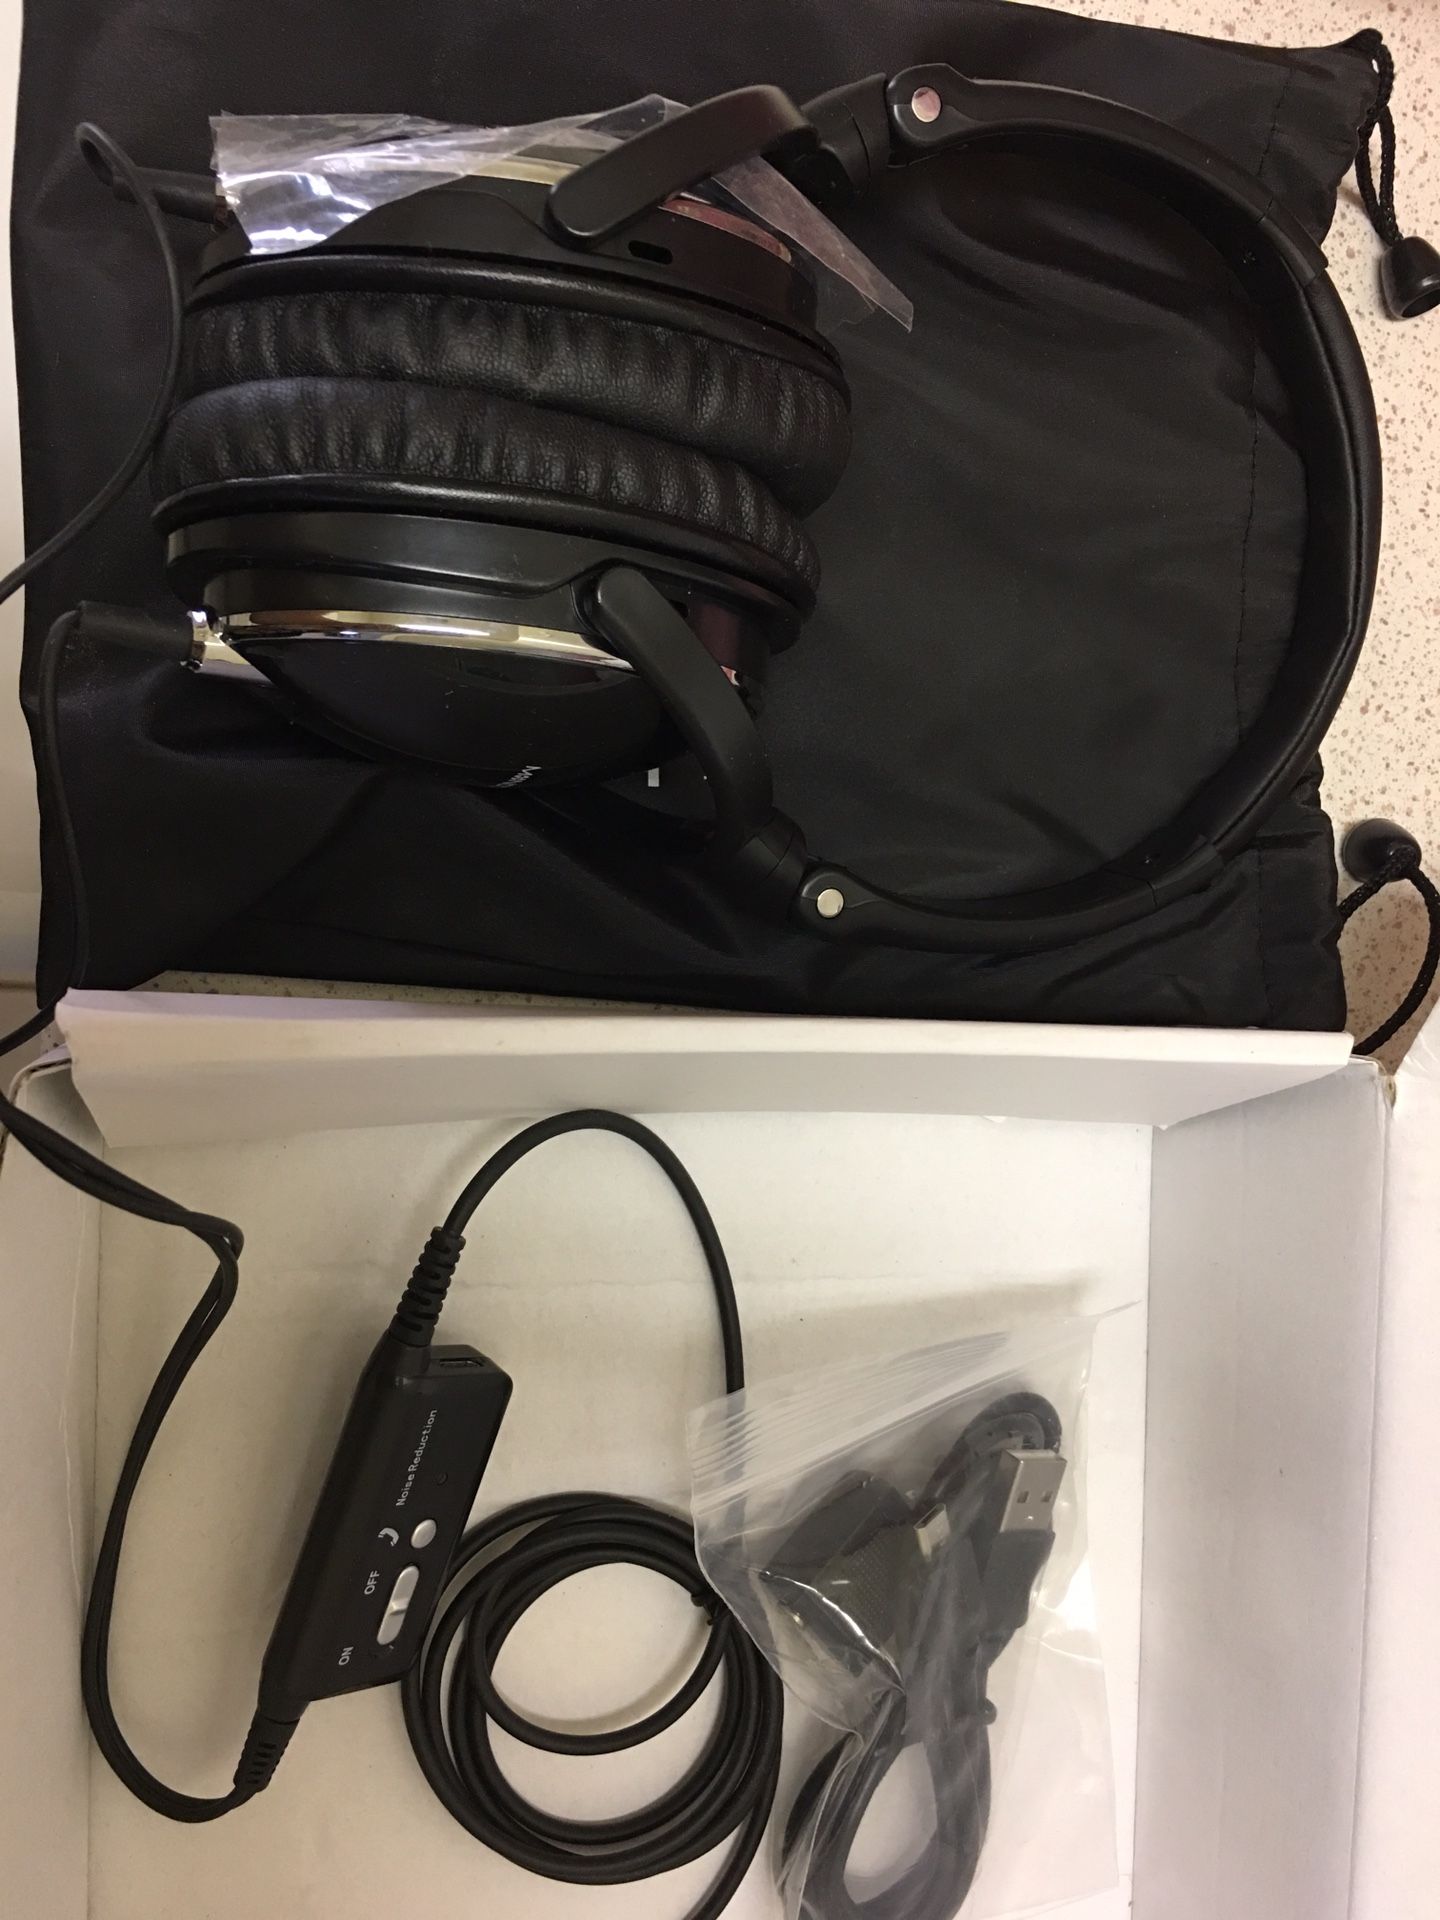 Active Noise Cancelling Headphones with Mic, MonoDeal Over Ear Deep Bass Earphones, Folding and Lightweight Travel Headset with Carrying Case - Black